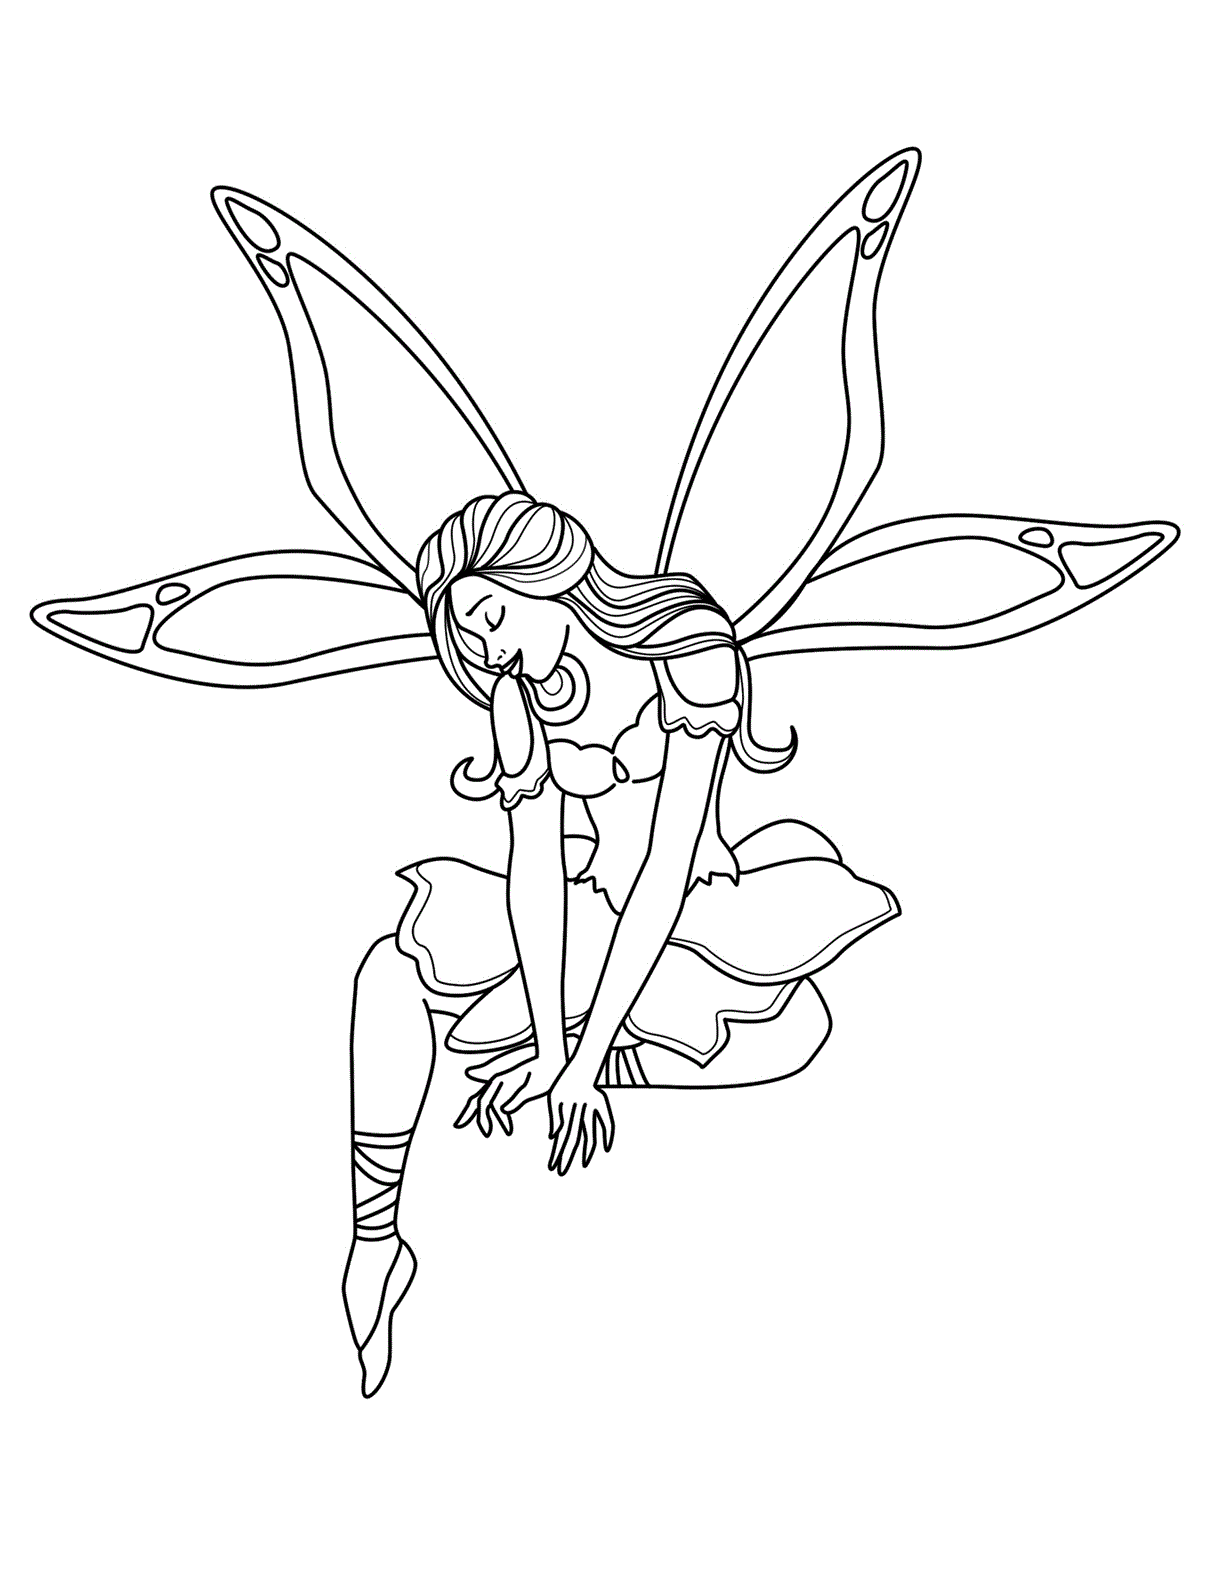 Fairy Colouring Pages Printable Free - High Quality Coloring Pages